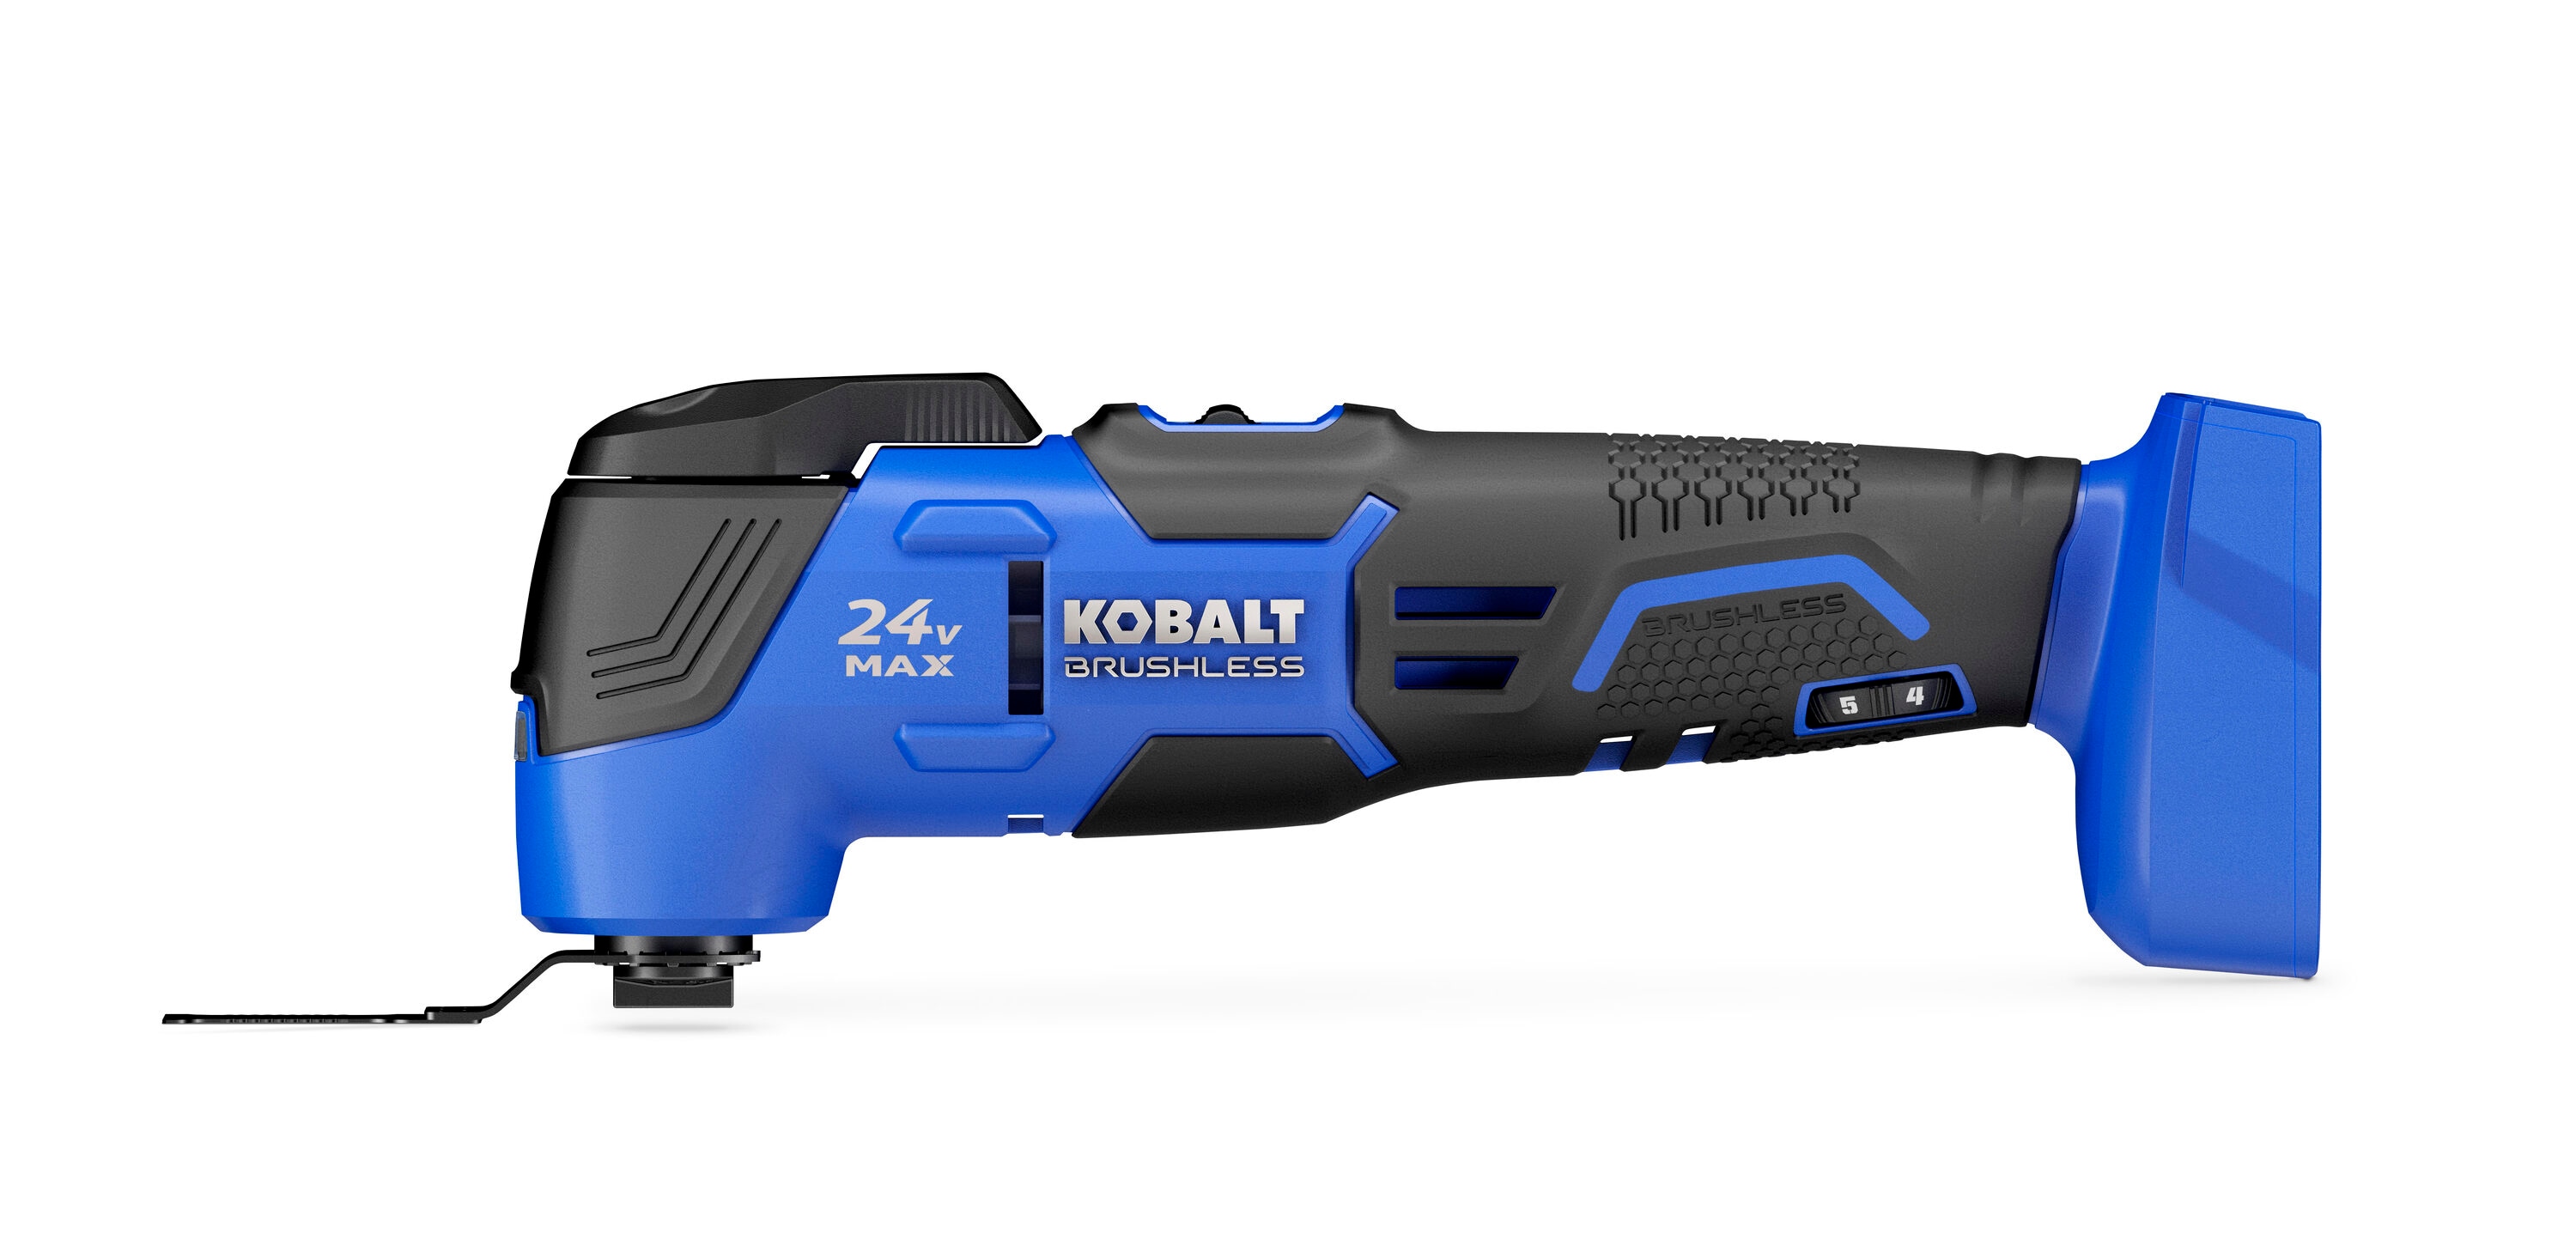 Kobalt Cordless Brushless 24-volt Variable Speed 18-Piece Oscillating  Multi-Tool Kit with Soft Case at